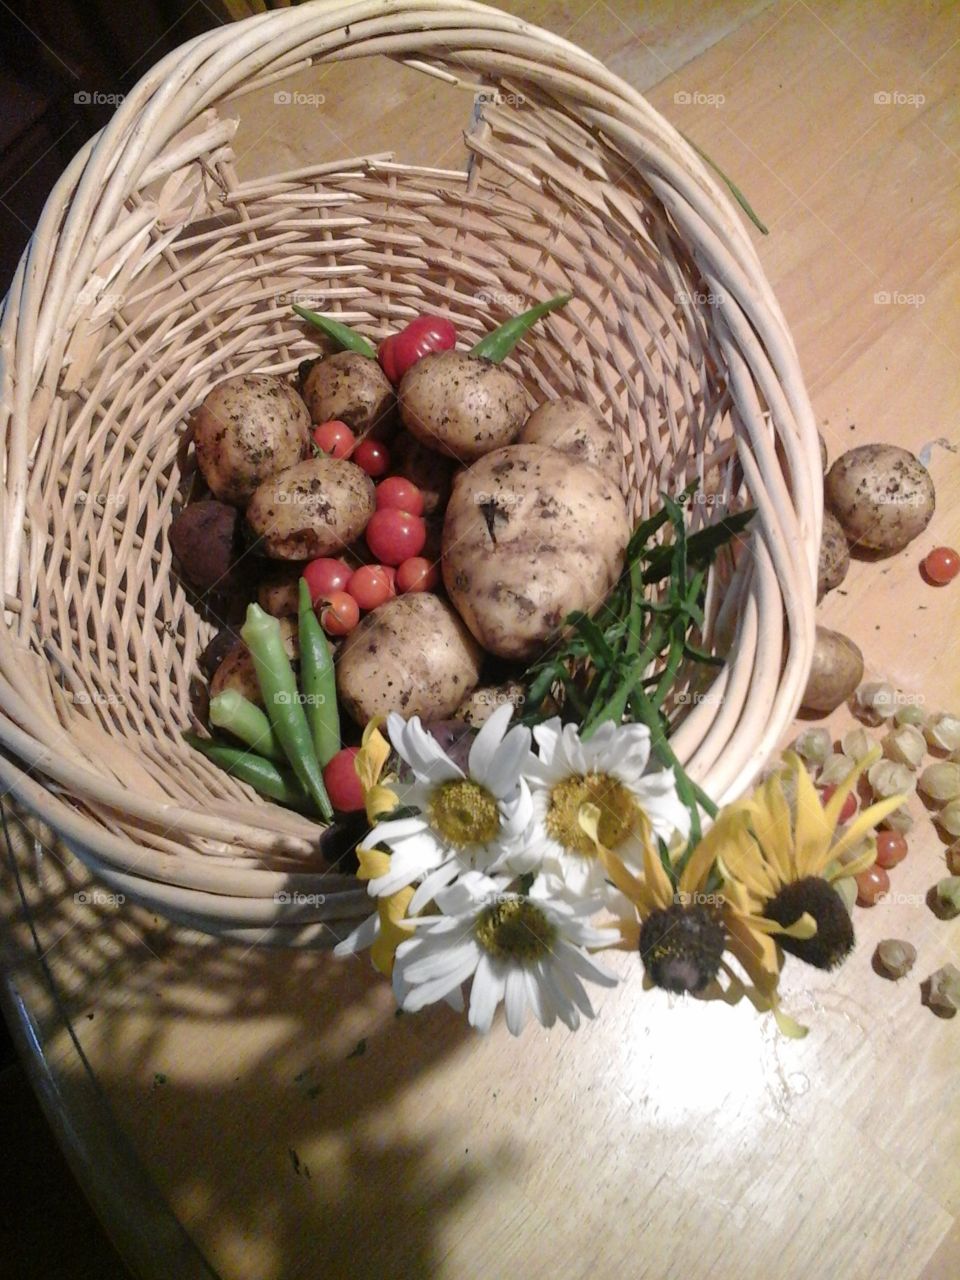 basket of pickings from the garden